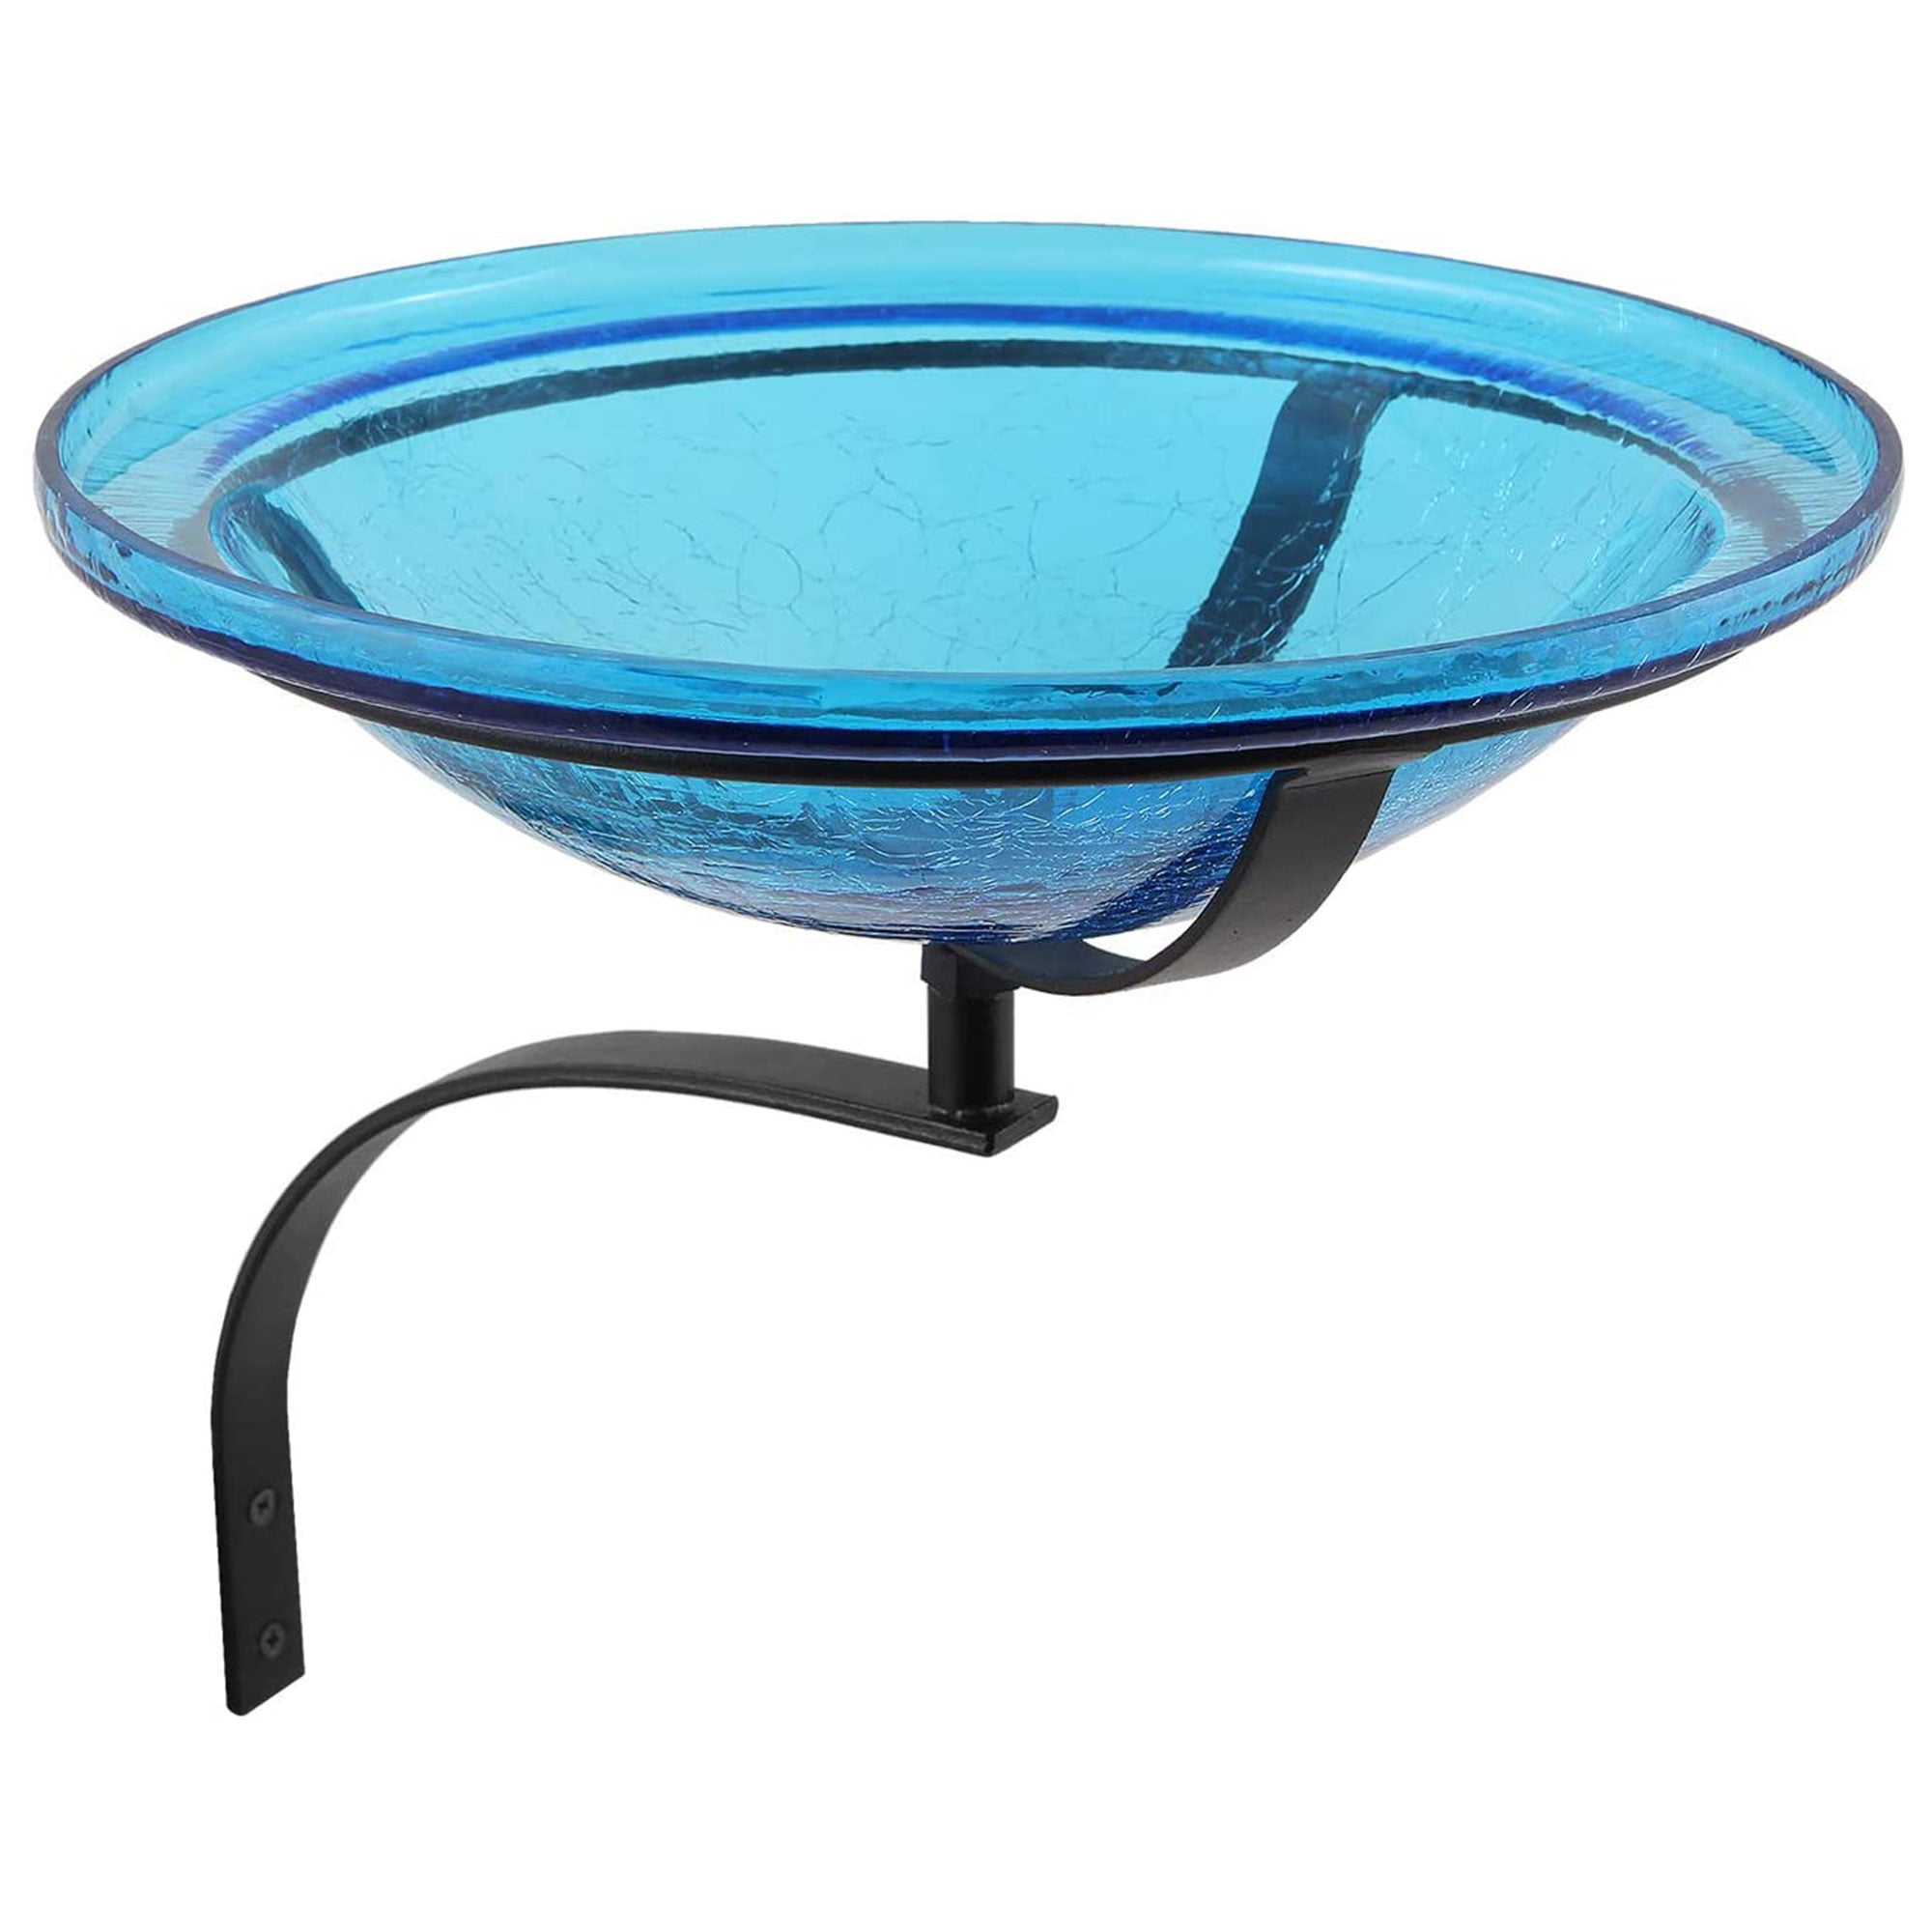 Picture of Achla CGB-07T-WM 12 in. Teal Crackle Birdbath with Wall Mount Bracket